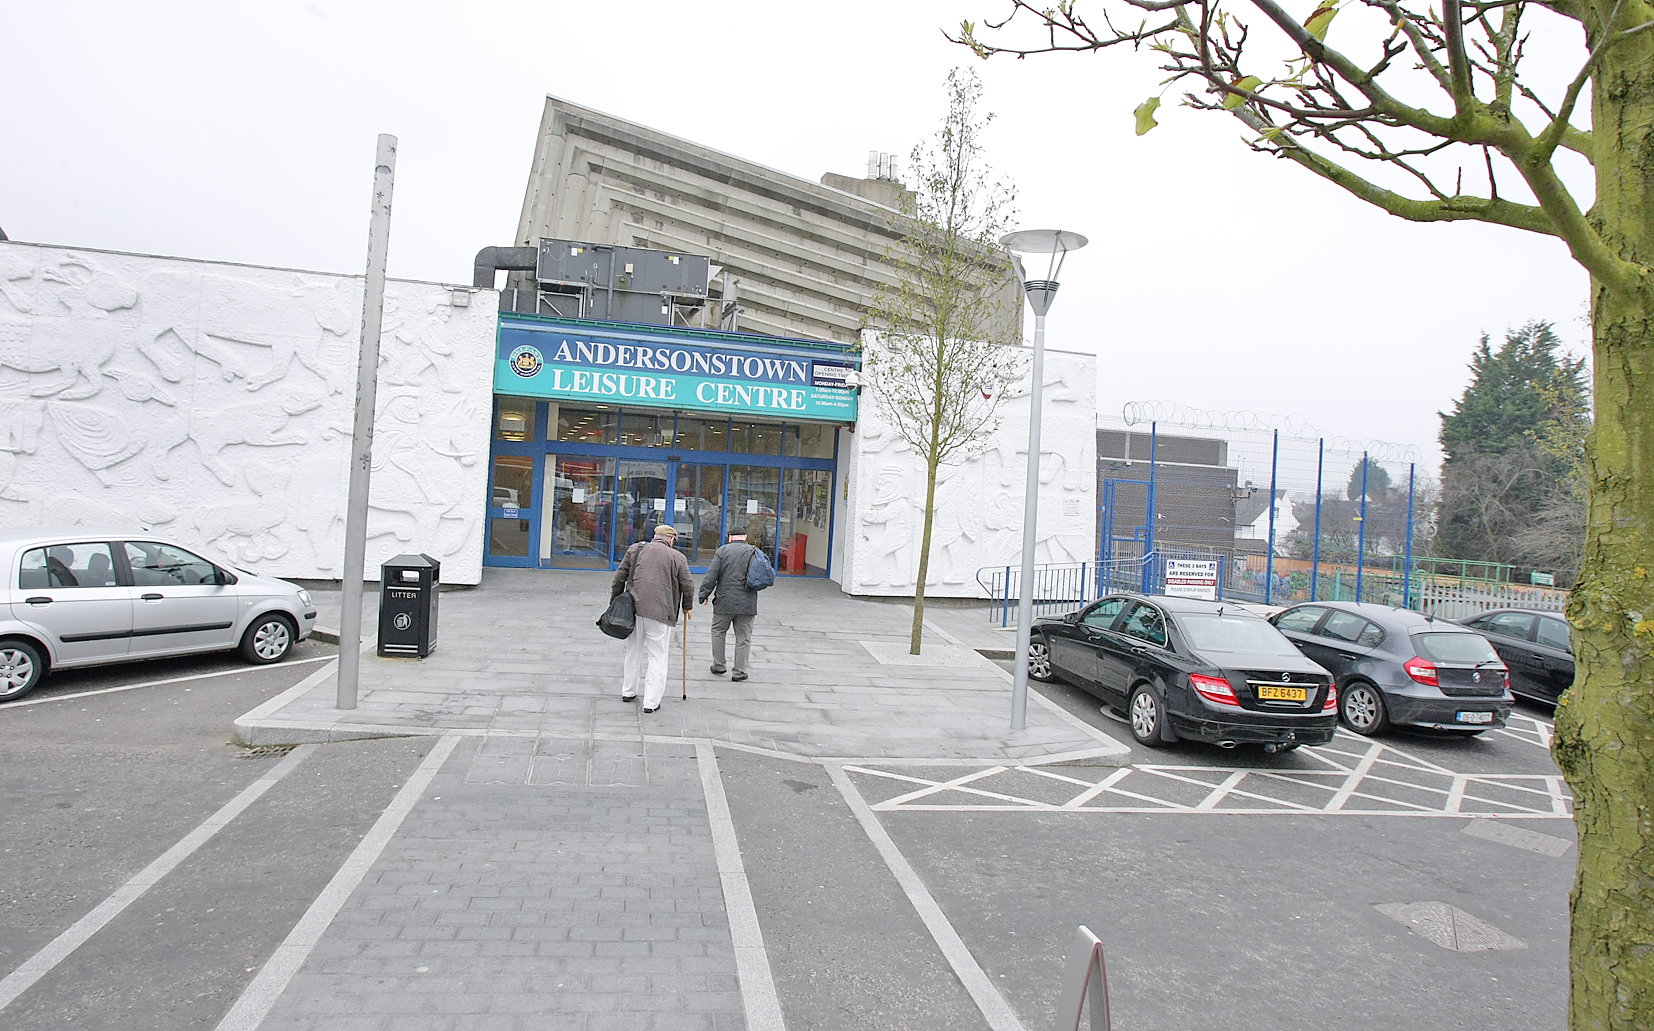 CONFUSION: There is confusion over the future plans for the redevelopment of Andersonstown Leisure Centre